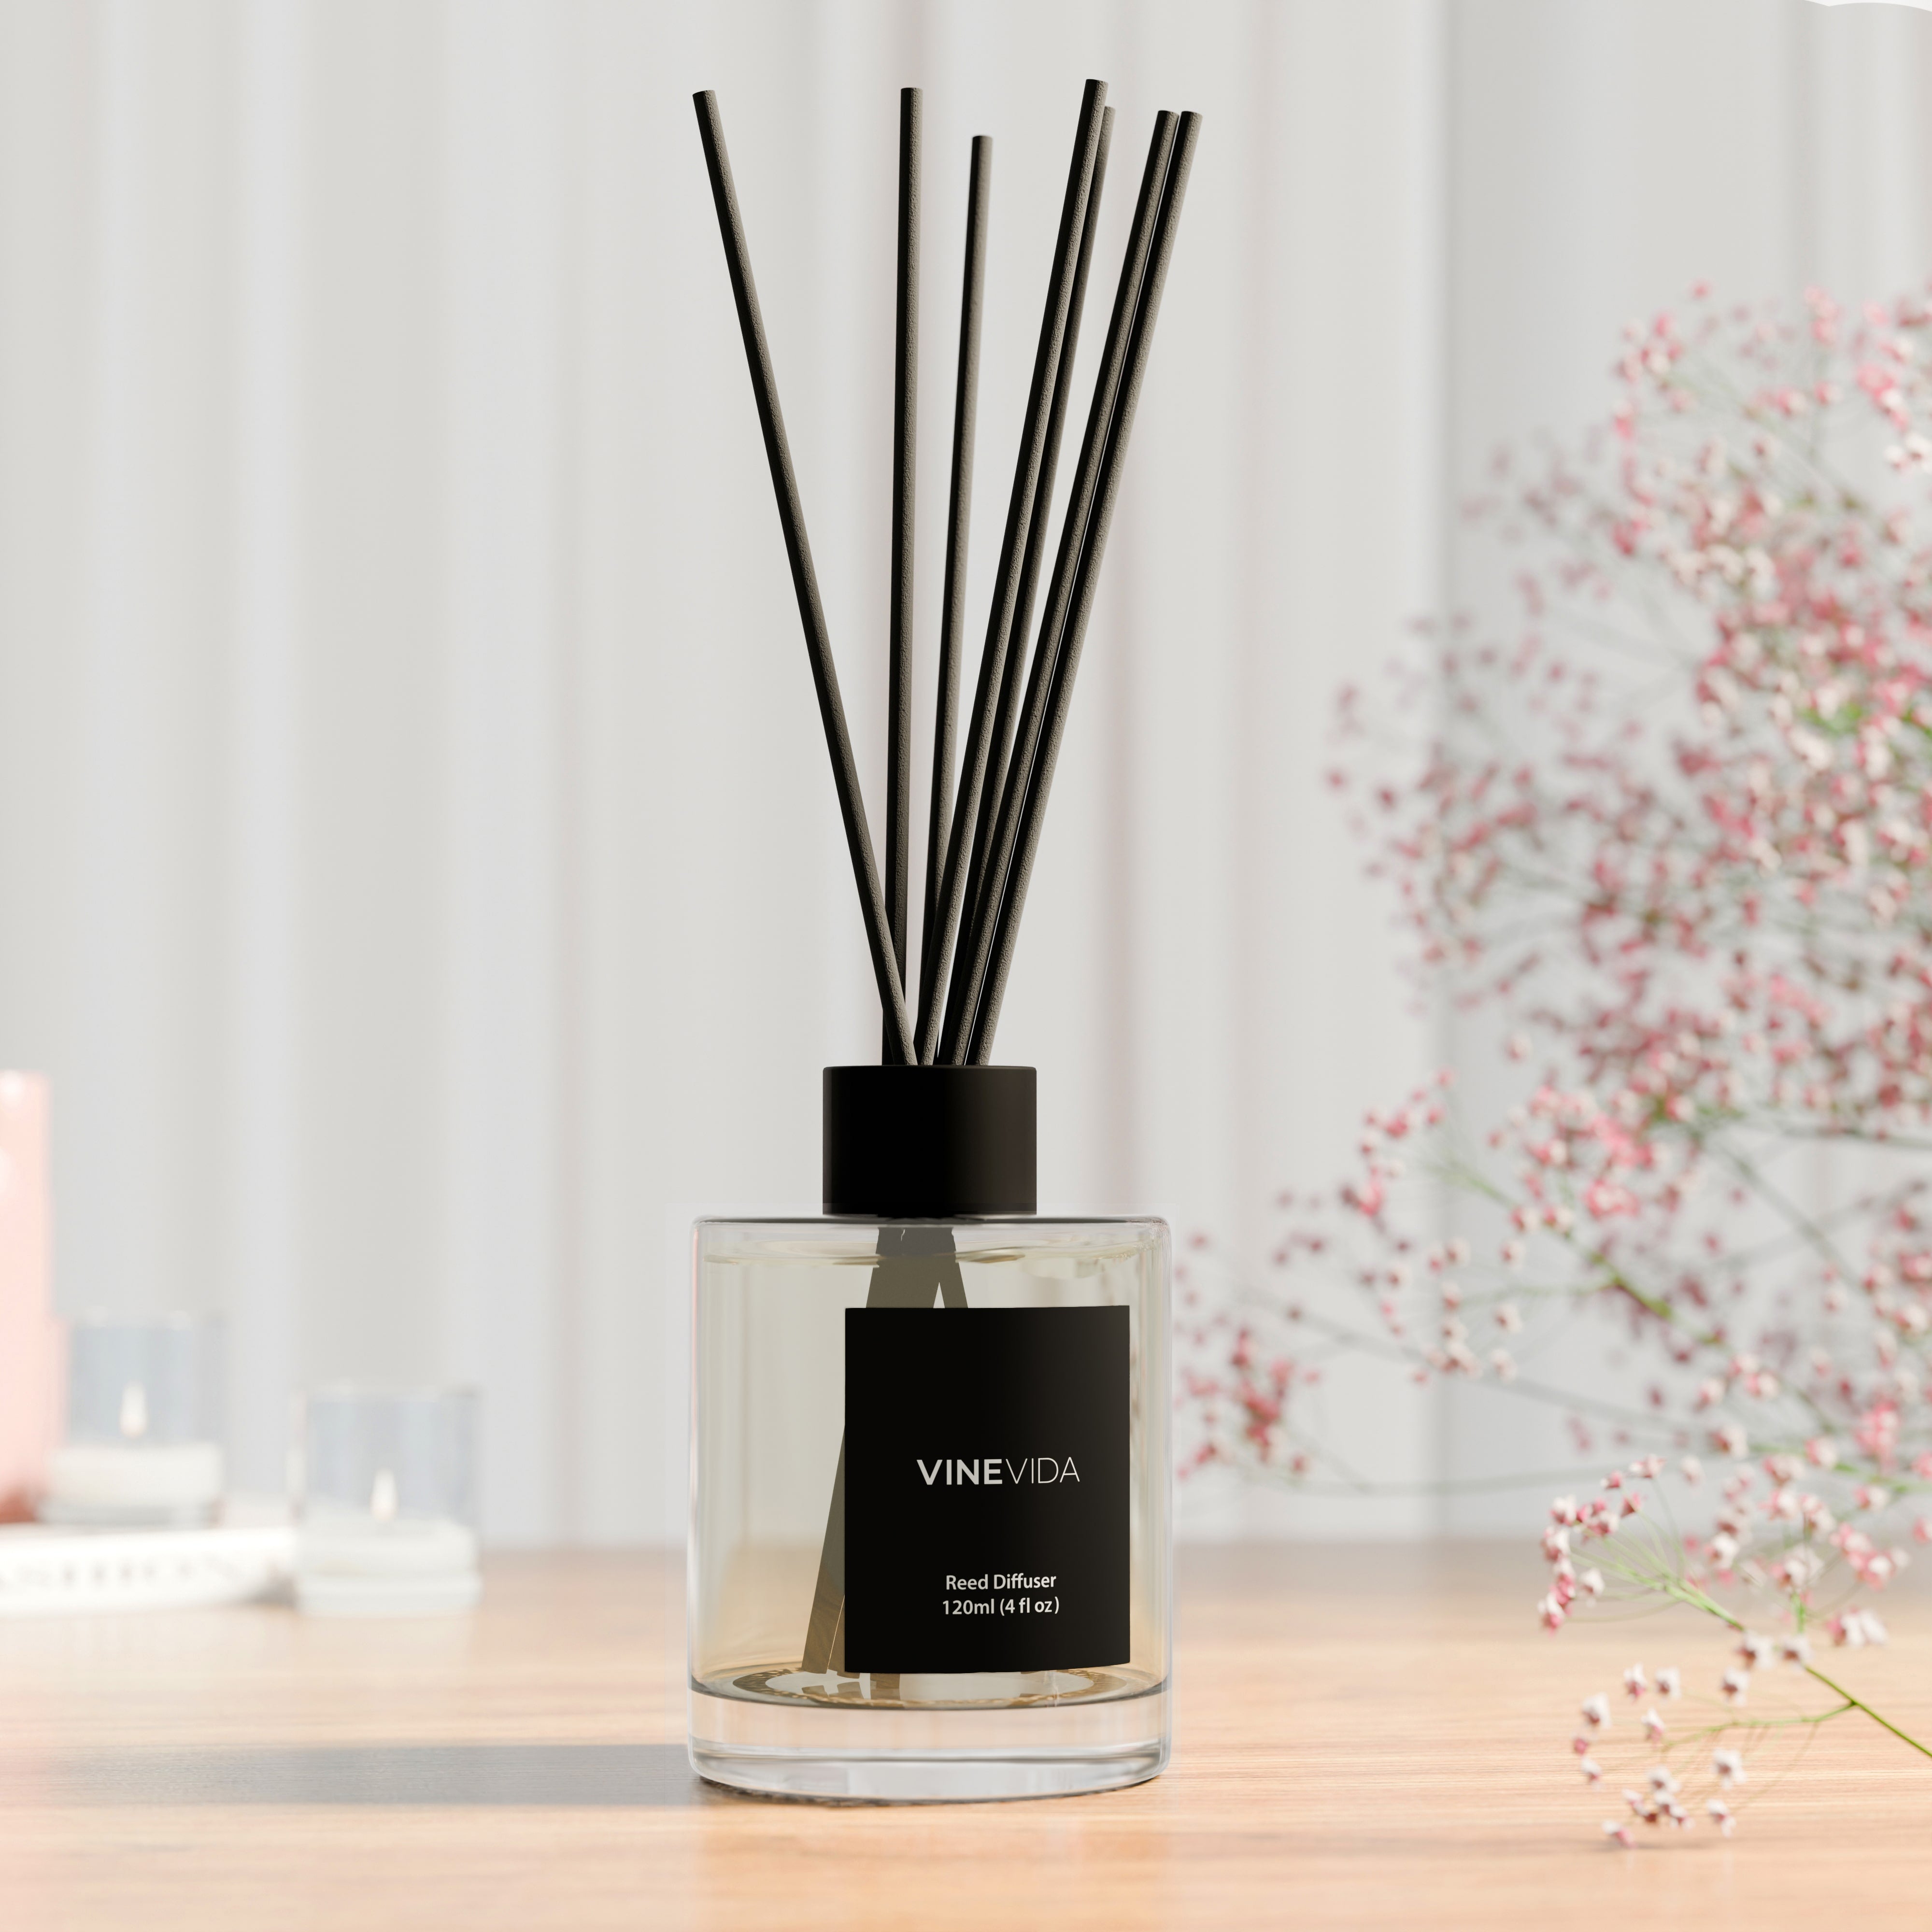 NO. 3001 Reed Diffuser - Inspired by: Coco Chanel #5 by Chanel